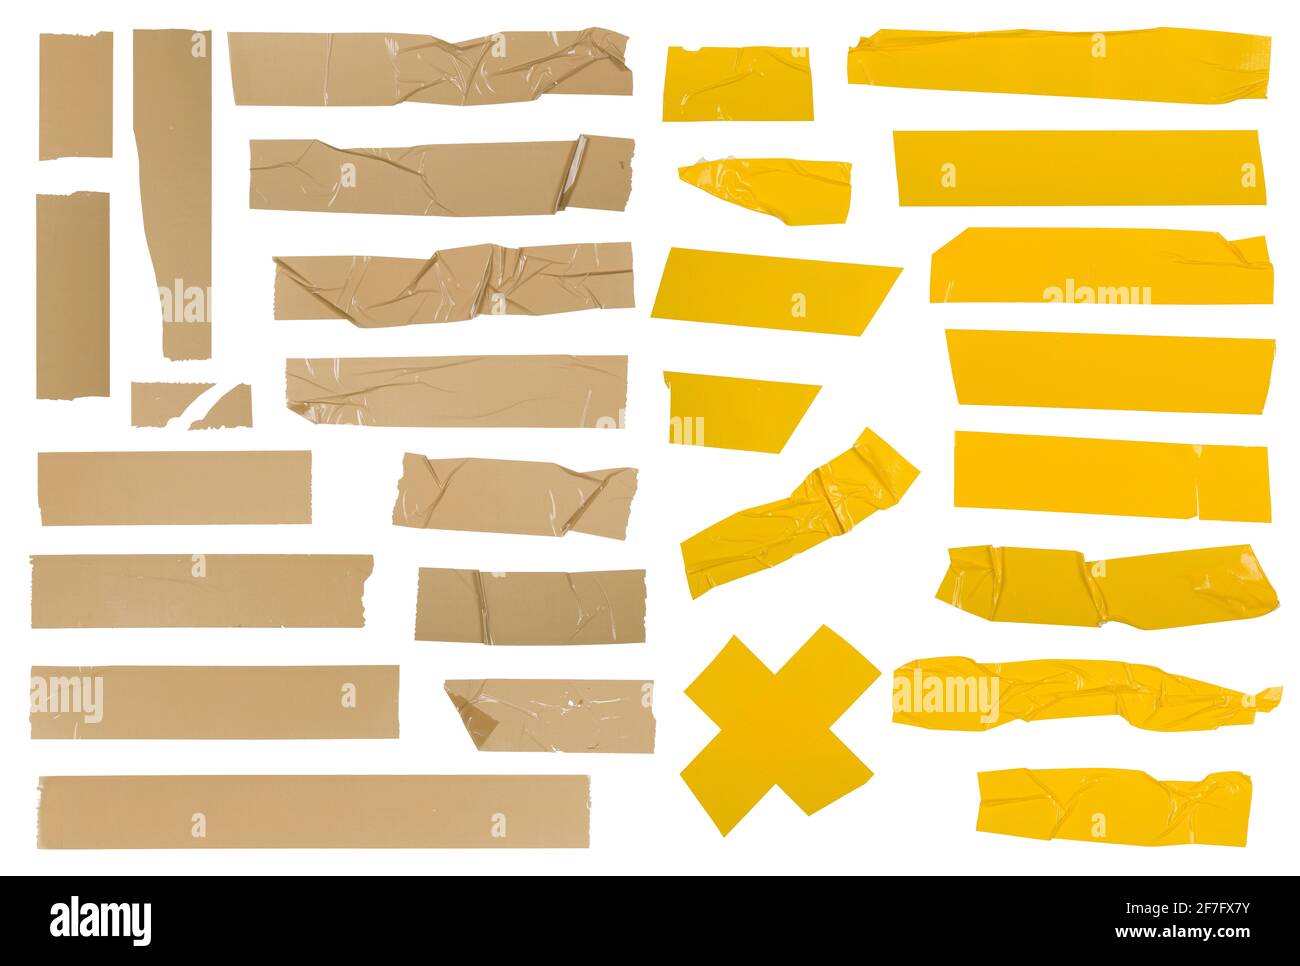 Big set of yellow and brown adhesive tape pieces Stock Photo